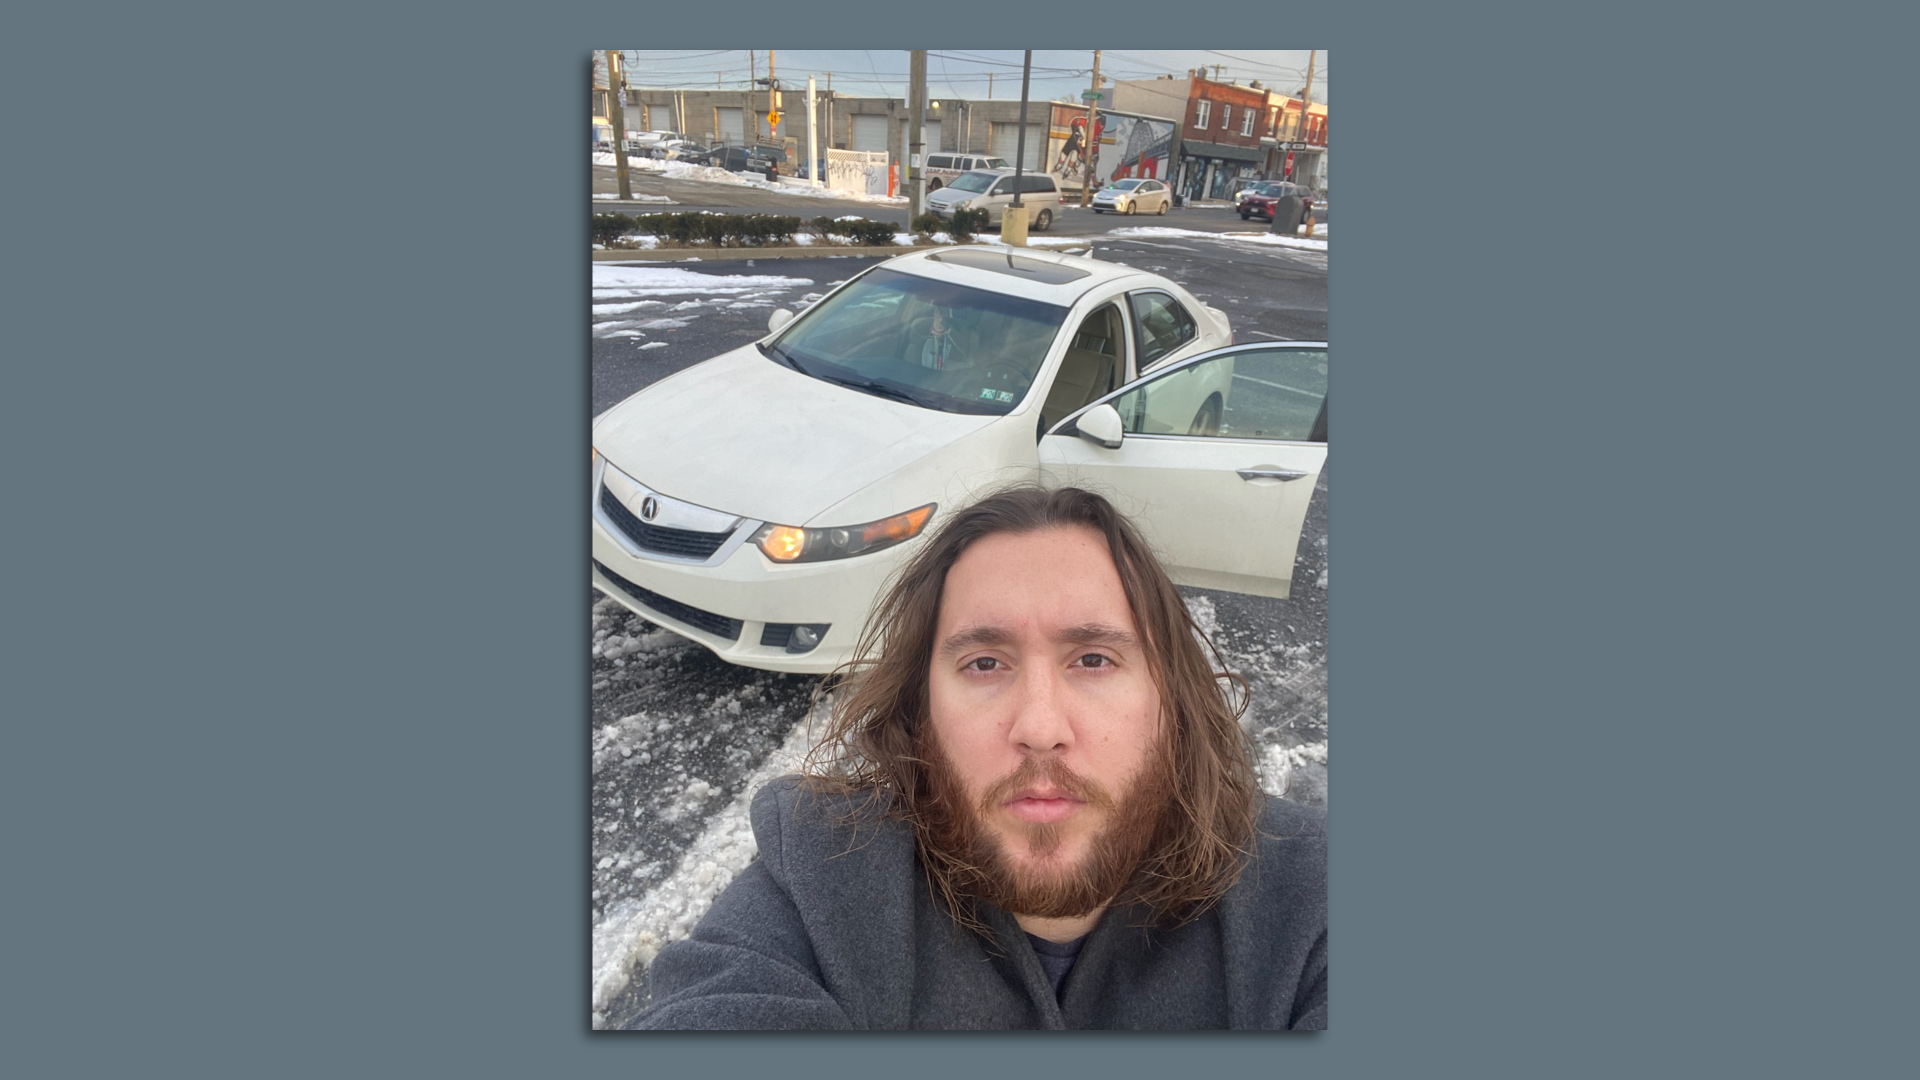 Michael Grant AKA "Philly Jesus" standing in front of his Acura.